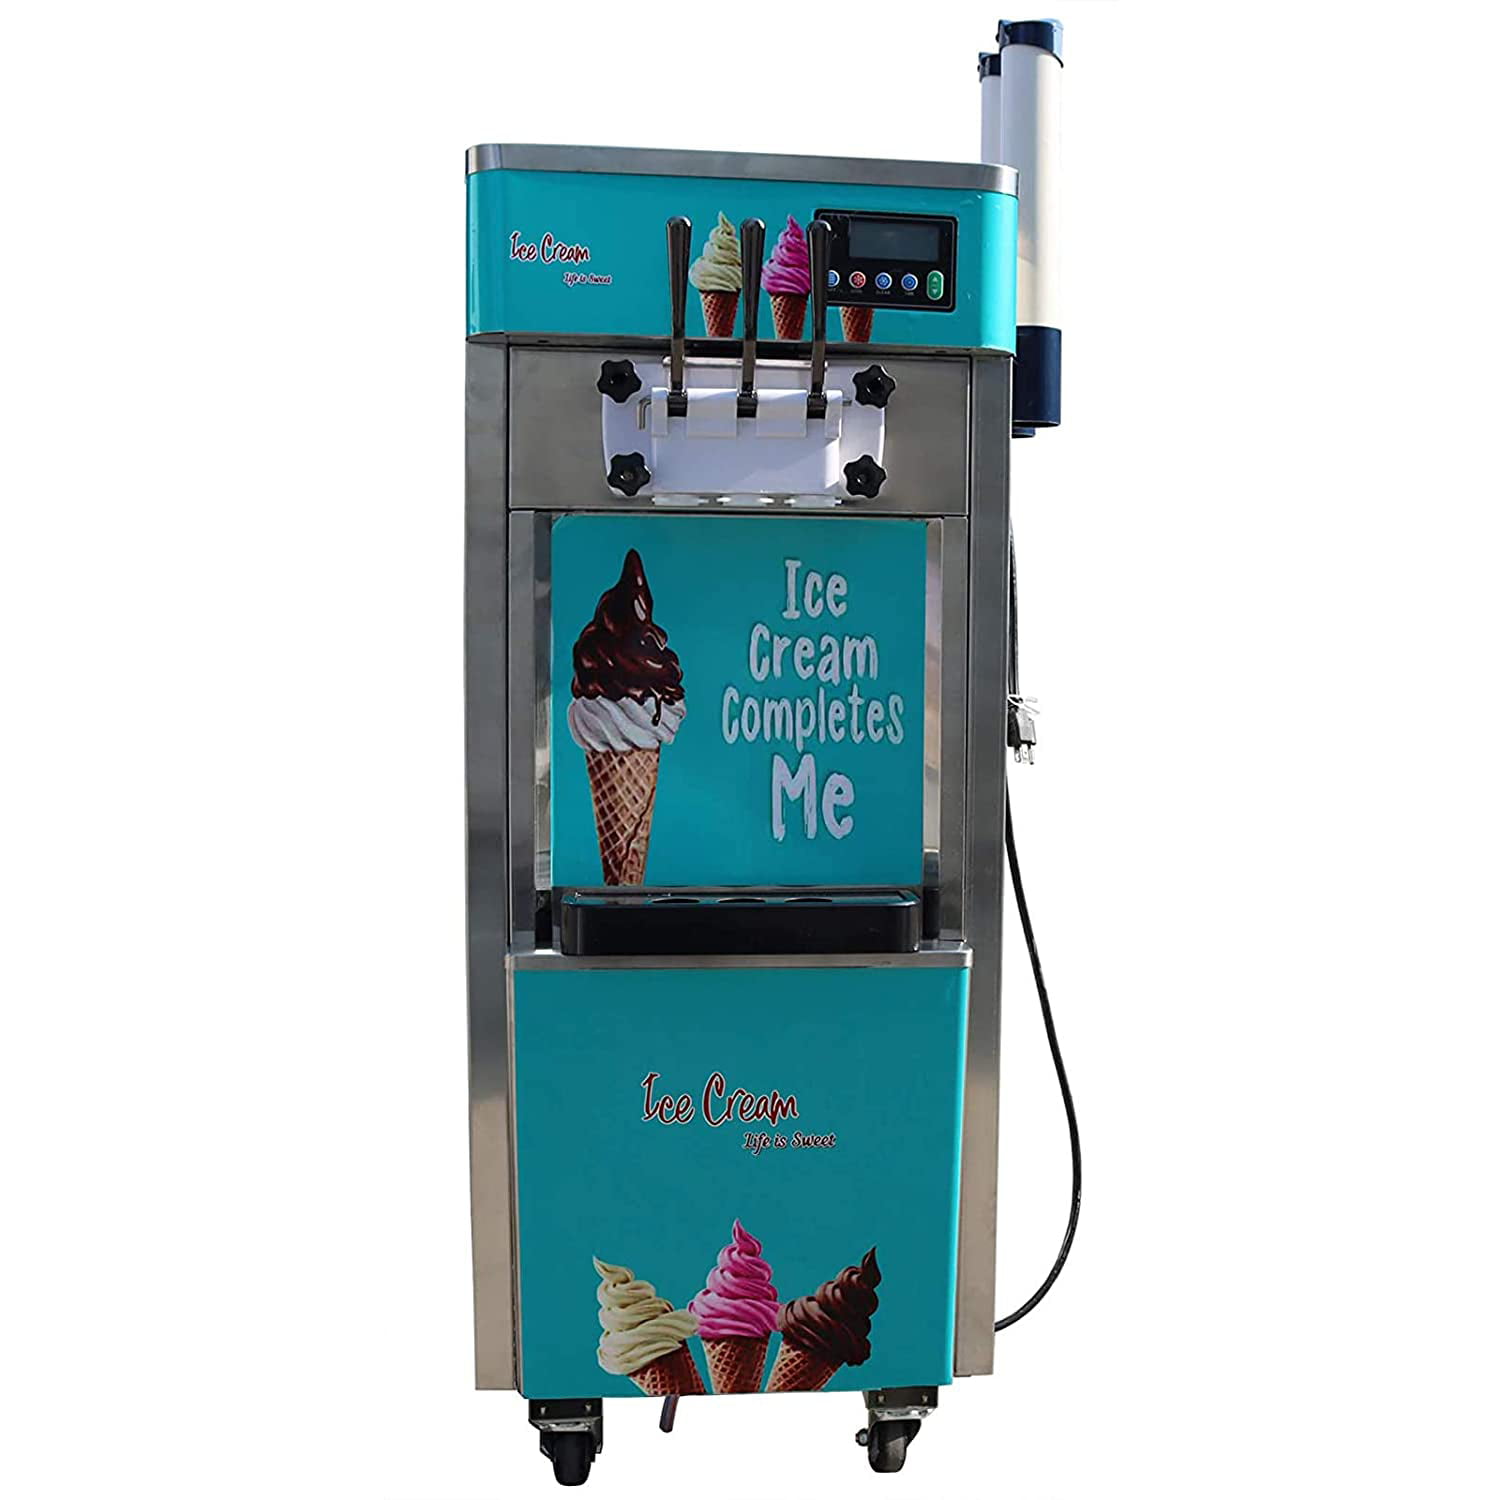 110V 20L/H Soft Ice Cream Cones Making Machine Commercial Maker With 3 Flavors 